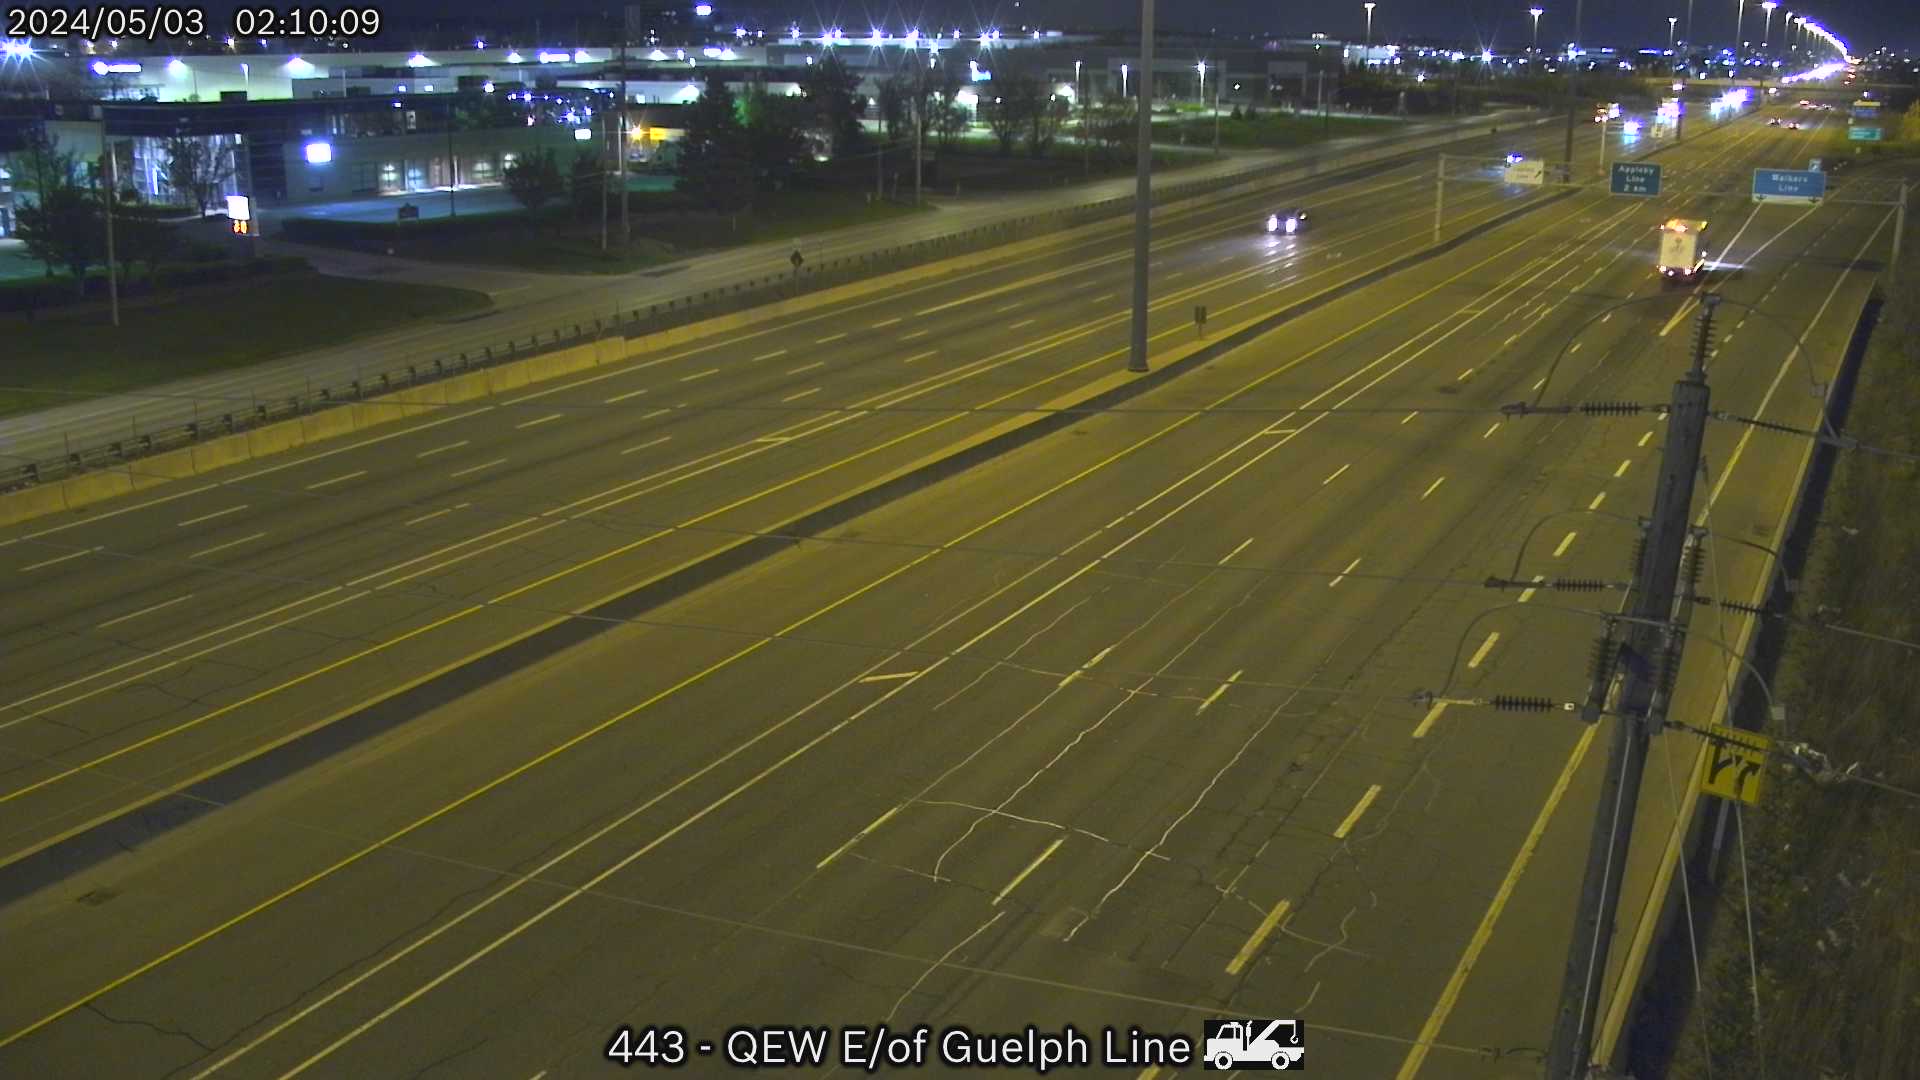 QEW between Guelph Line and Walkers Line Traffic Camera